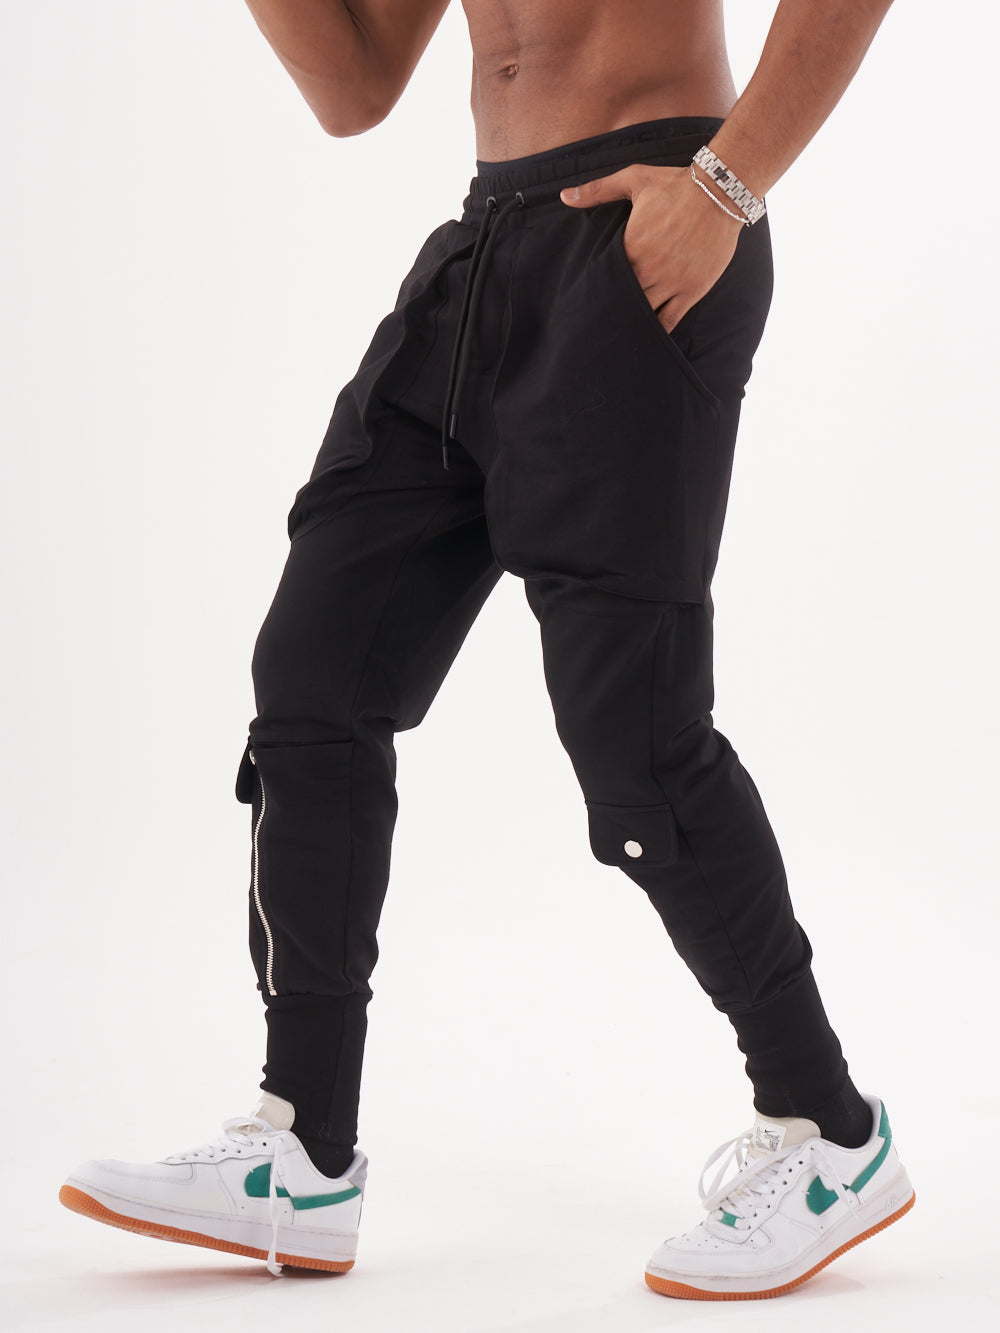 A man in GUERRILLA | BLACK jogging pants posing in front of a white background.